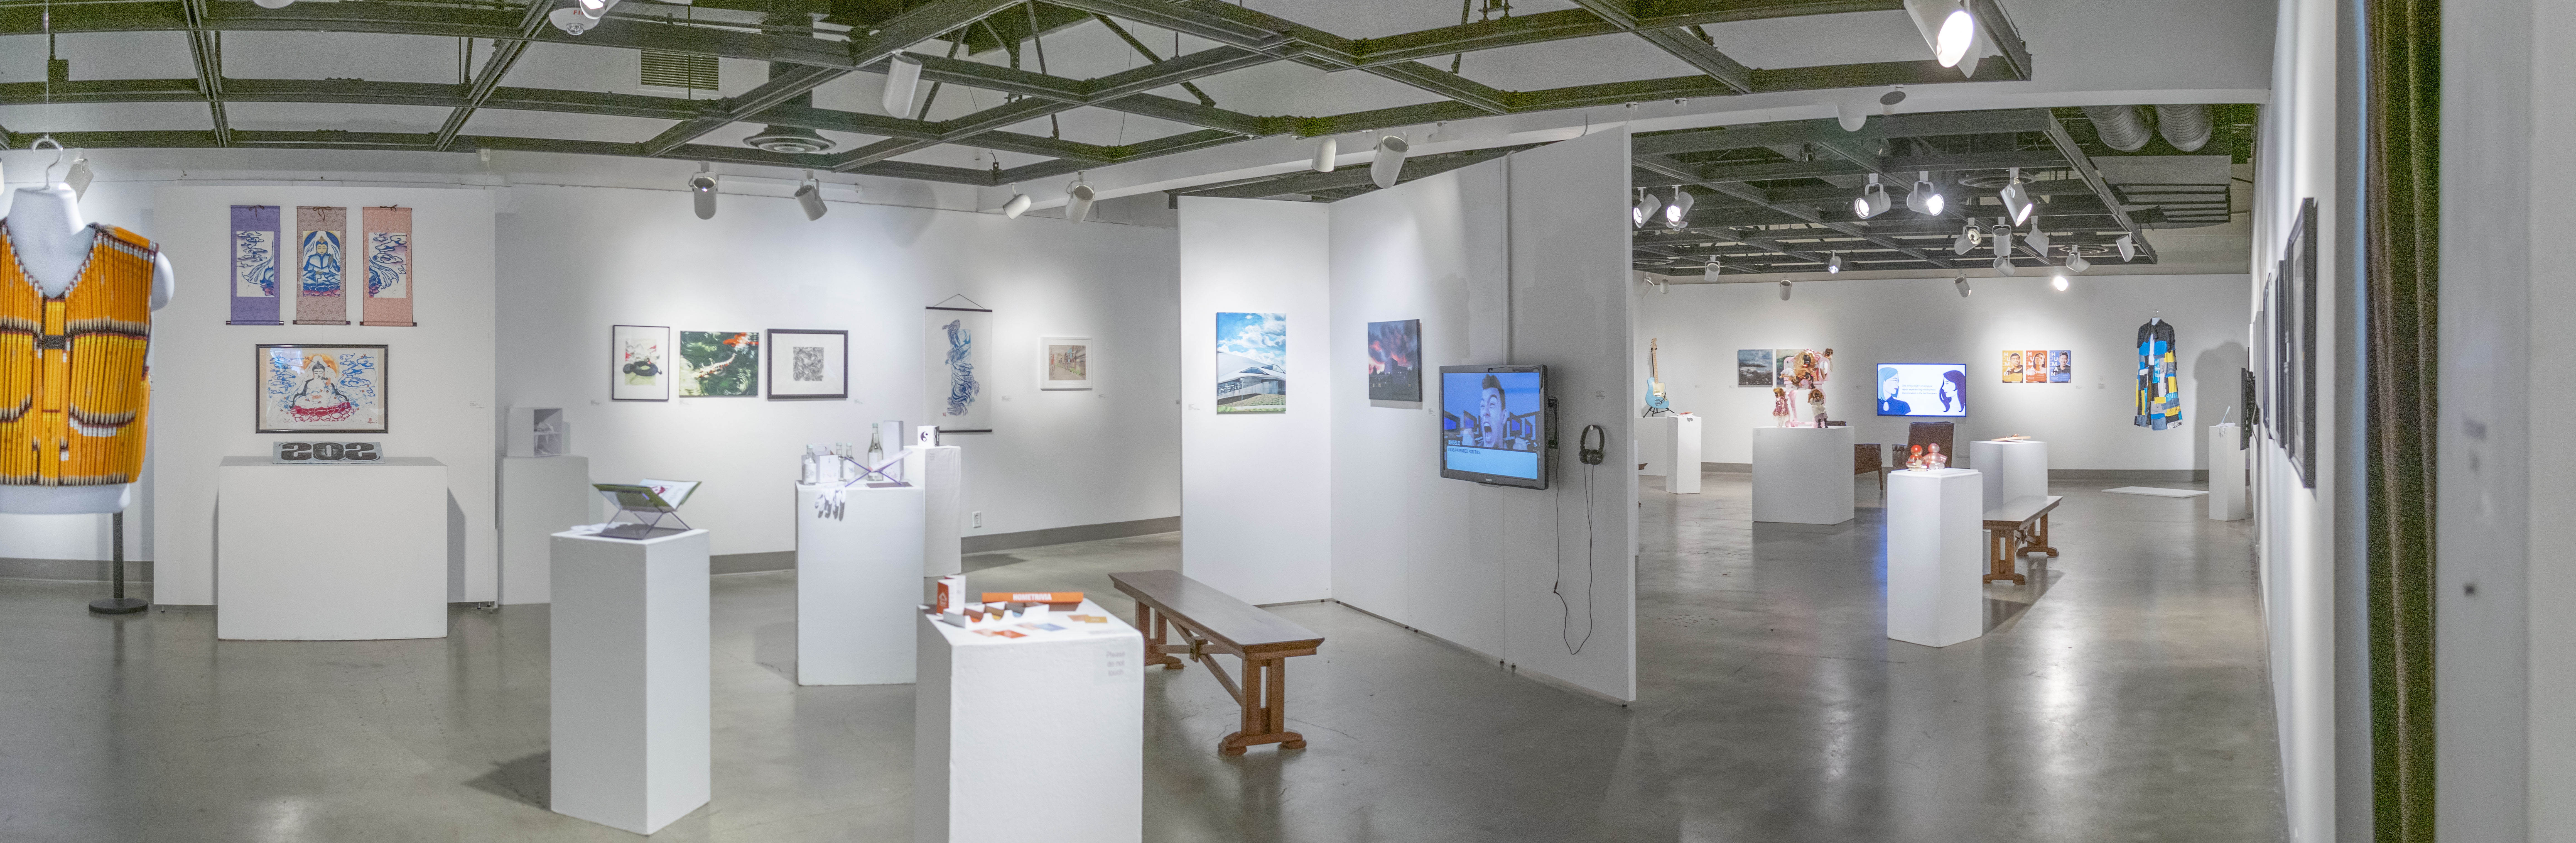 Back of gallery, Exhibition: PolyKroma 2019, Apr. 27, 2019 to May 19, 2019, Co-curated by Michele Cairella Fillmore & Sooyun Im, W. Keith & Janet Kellogg Art Gallery, Cal Poly Pomona. 